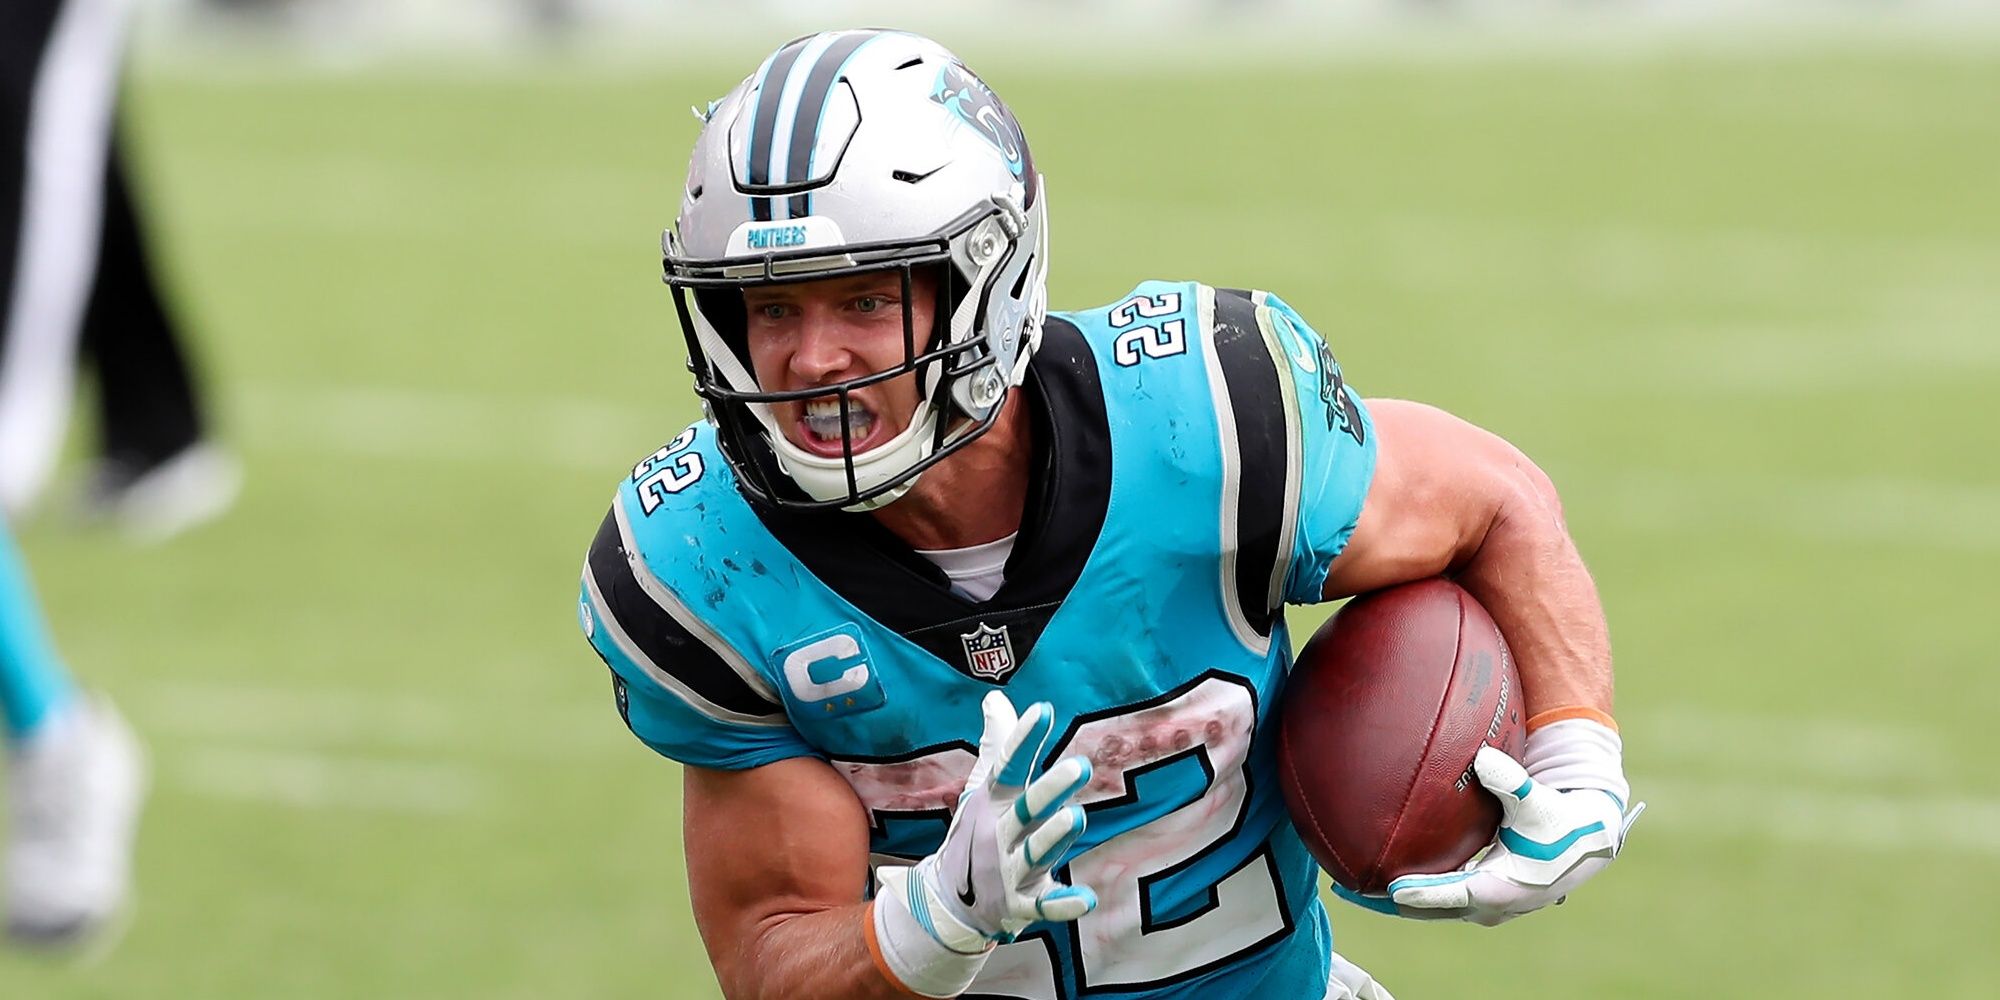 Christian McCaffrey angrily running the ball in light blue Panthers jersey